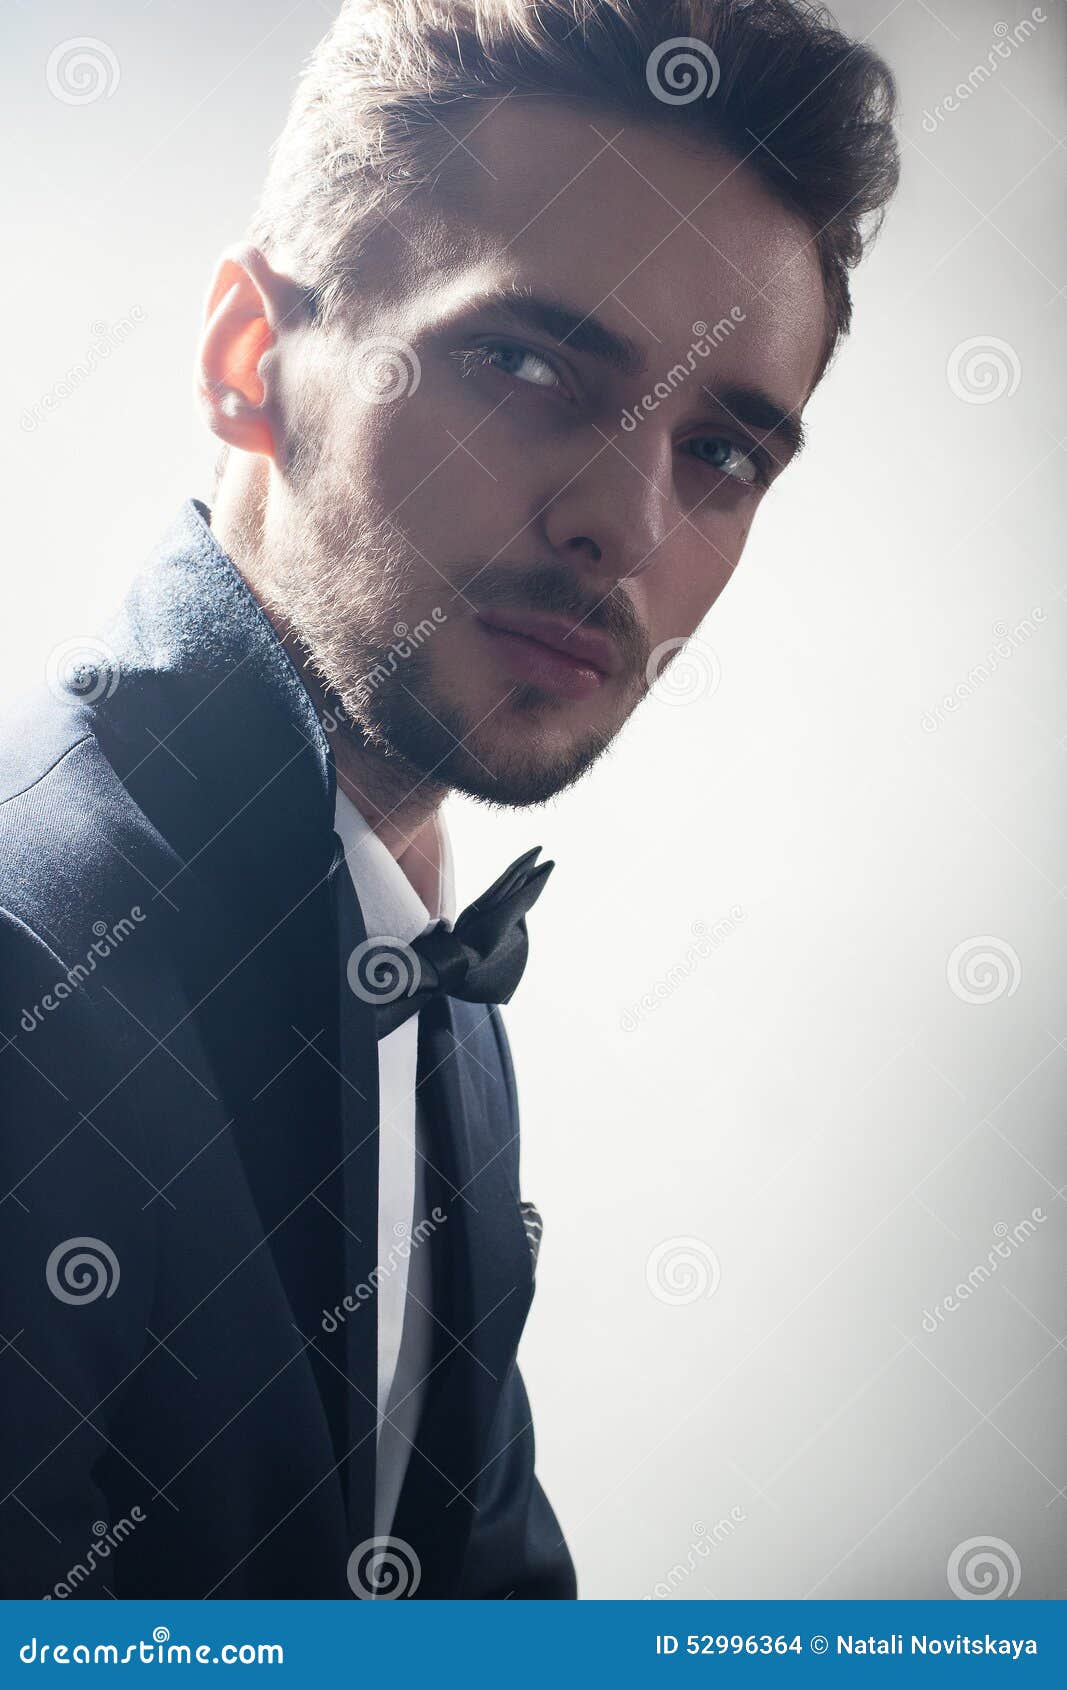 Man in classical dress stock photo. Image of beauty, close - 52996364